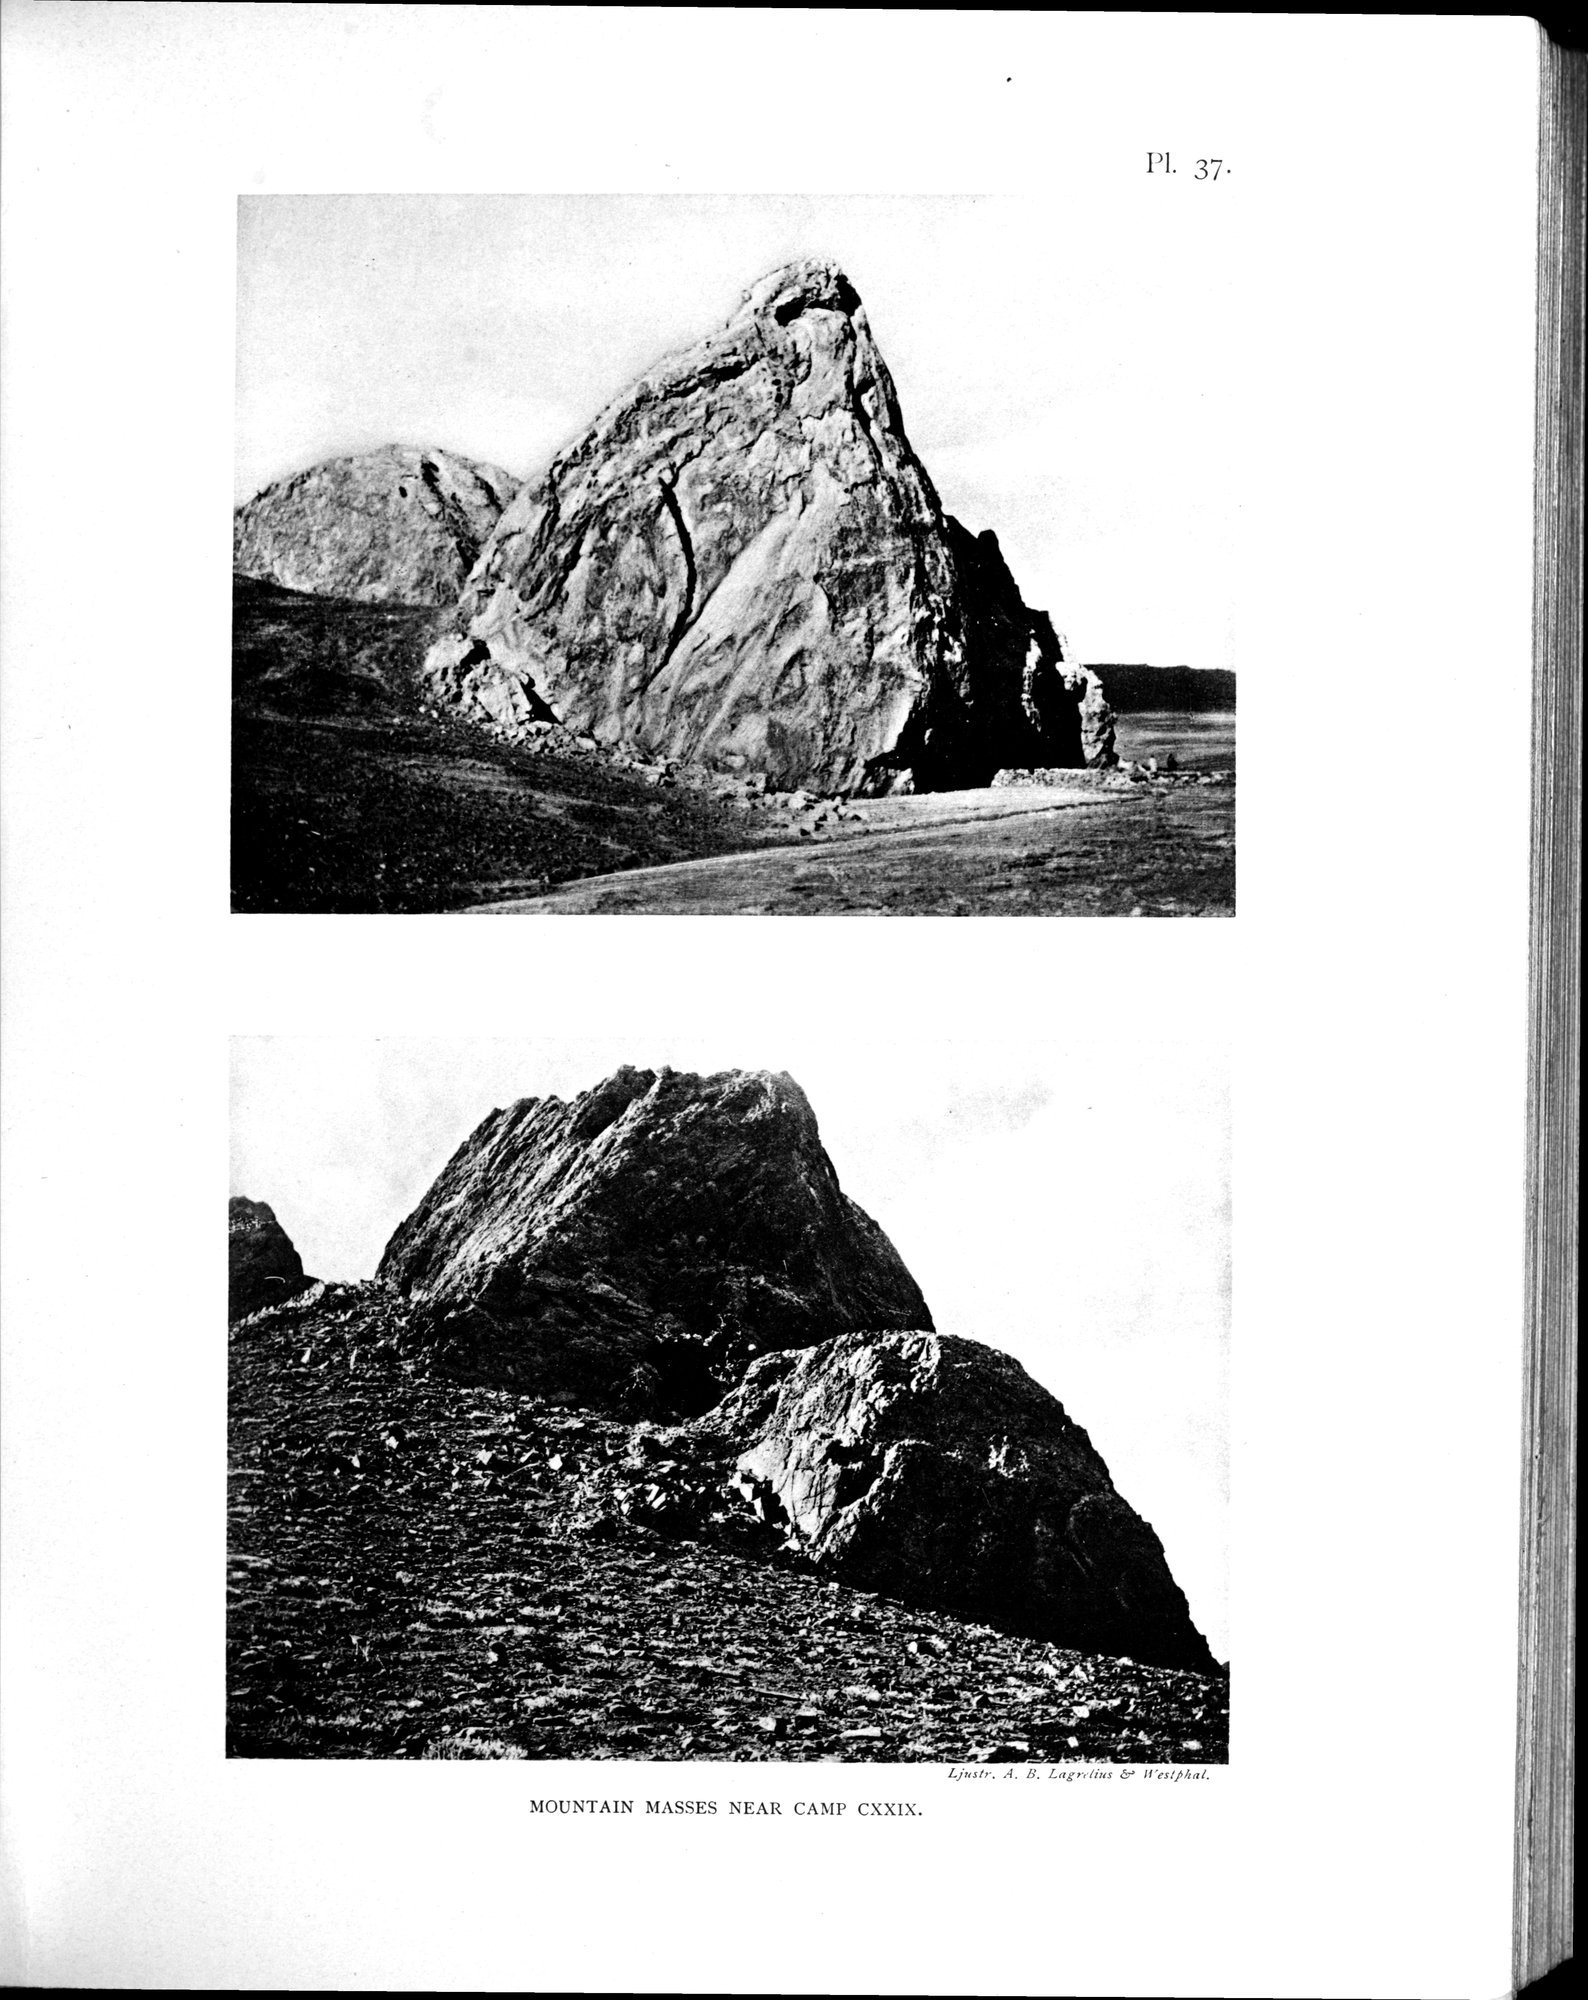 Scientific Results of a Journey in Central Asia, 1899-1902 : vol.4 / 339 ページ（白黒高解像度画像）